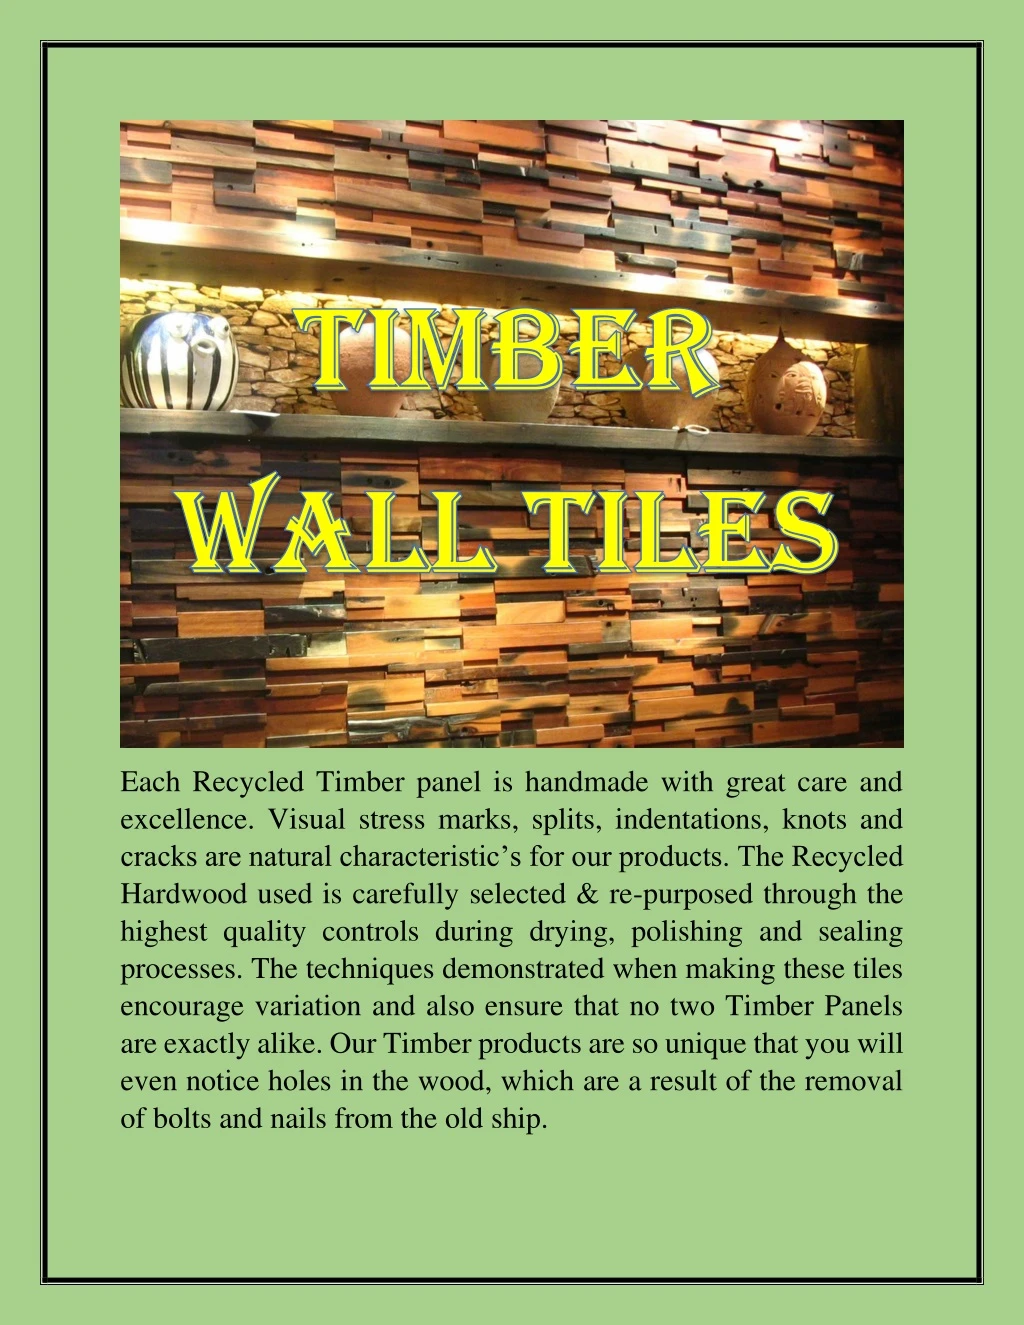 each recycled timber panel is handmade with great